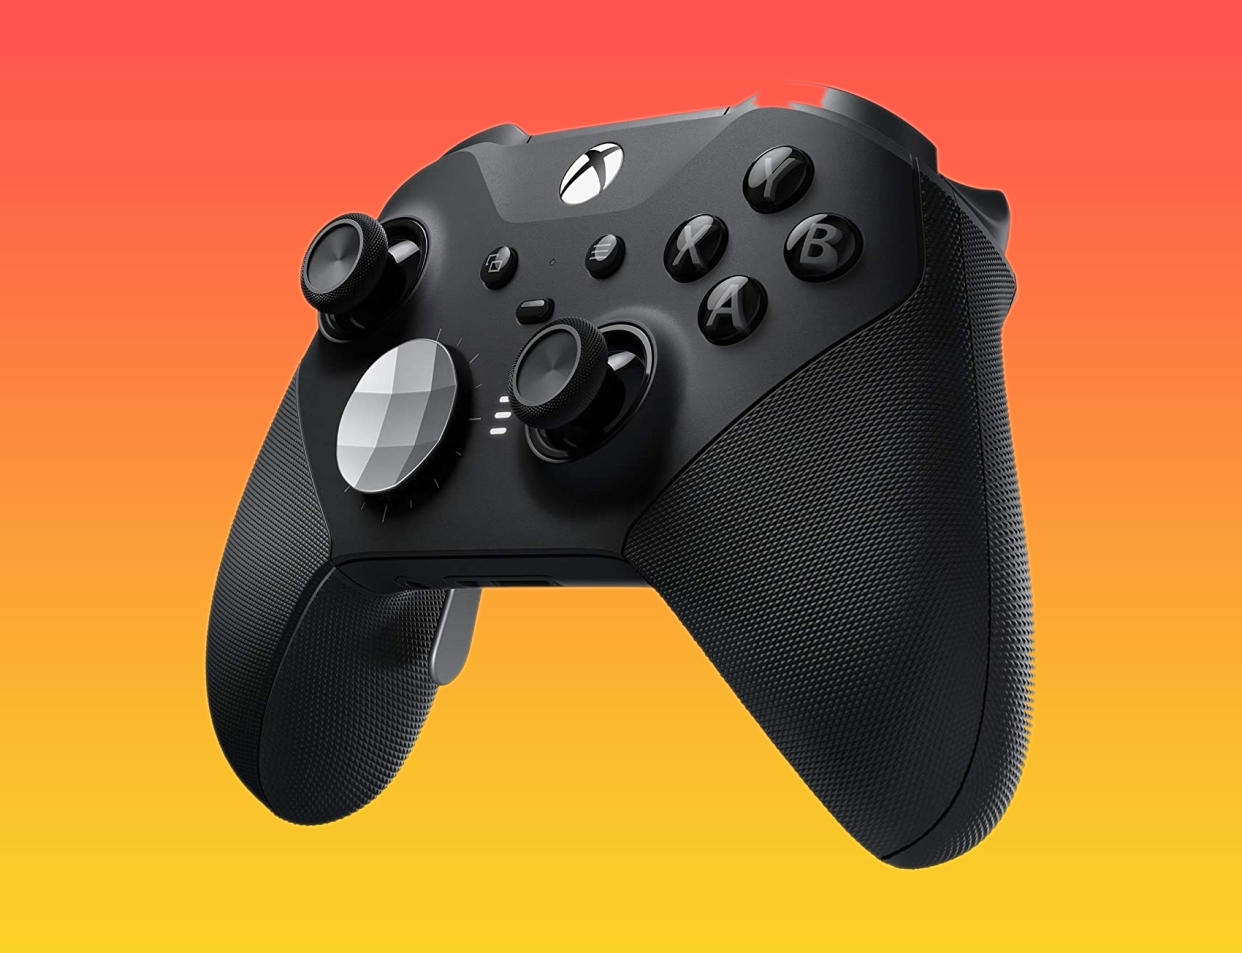 The textured grips on this gamepad will keep your hands cool. (Photo: Microsoft)